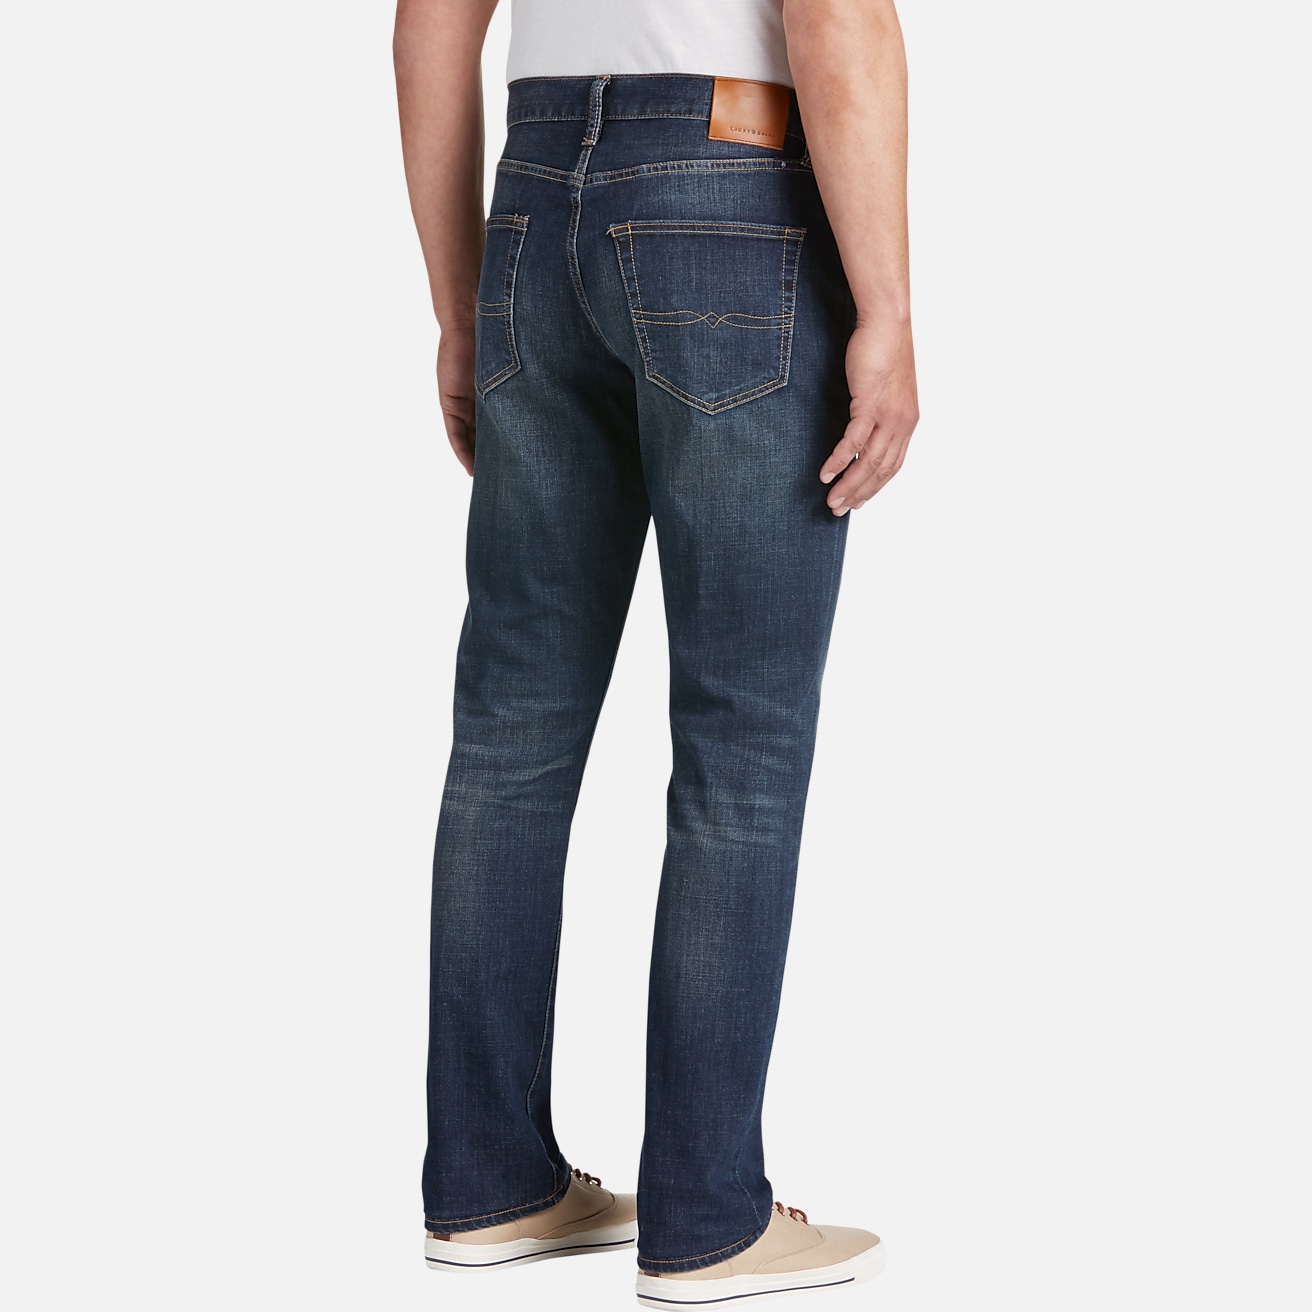 Lucky Brand Athletic Slim Jeans for Women